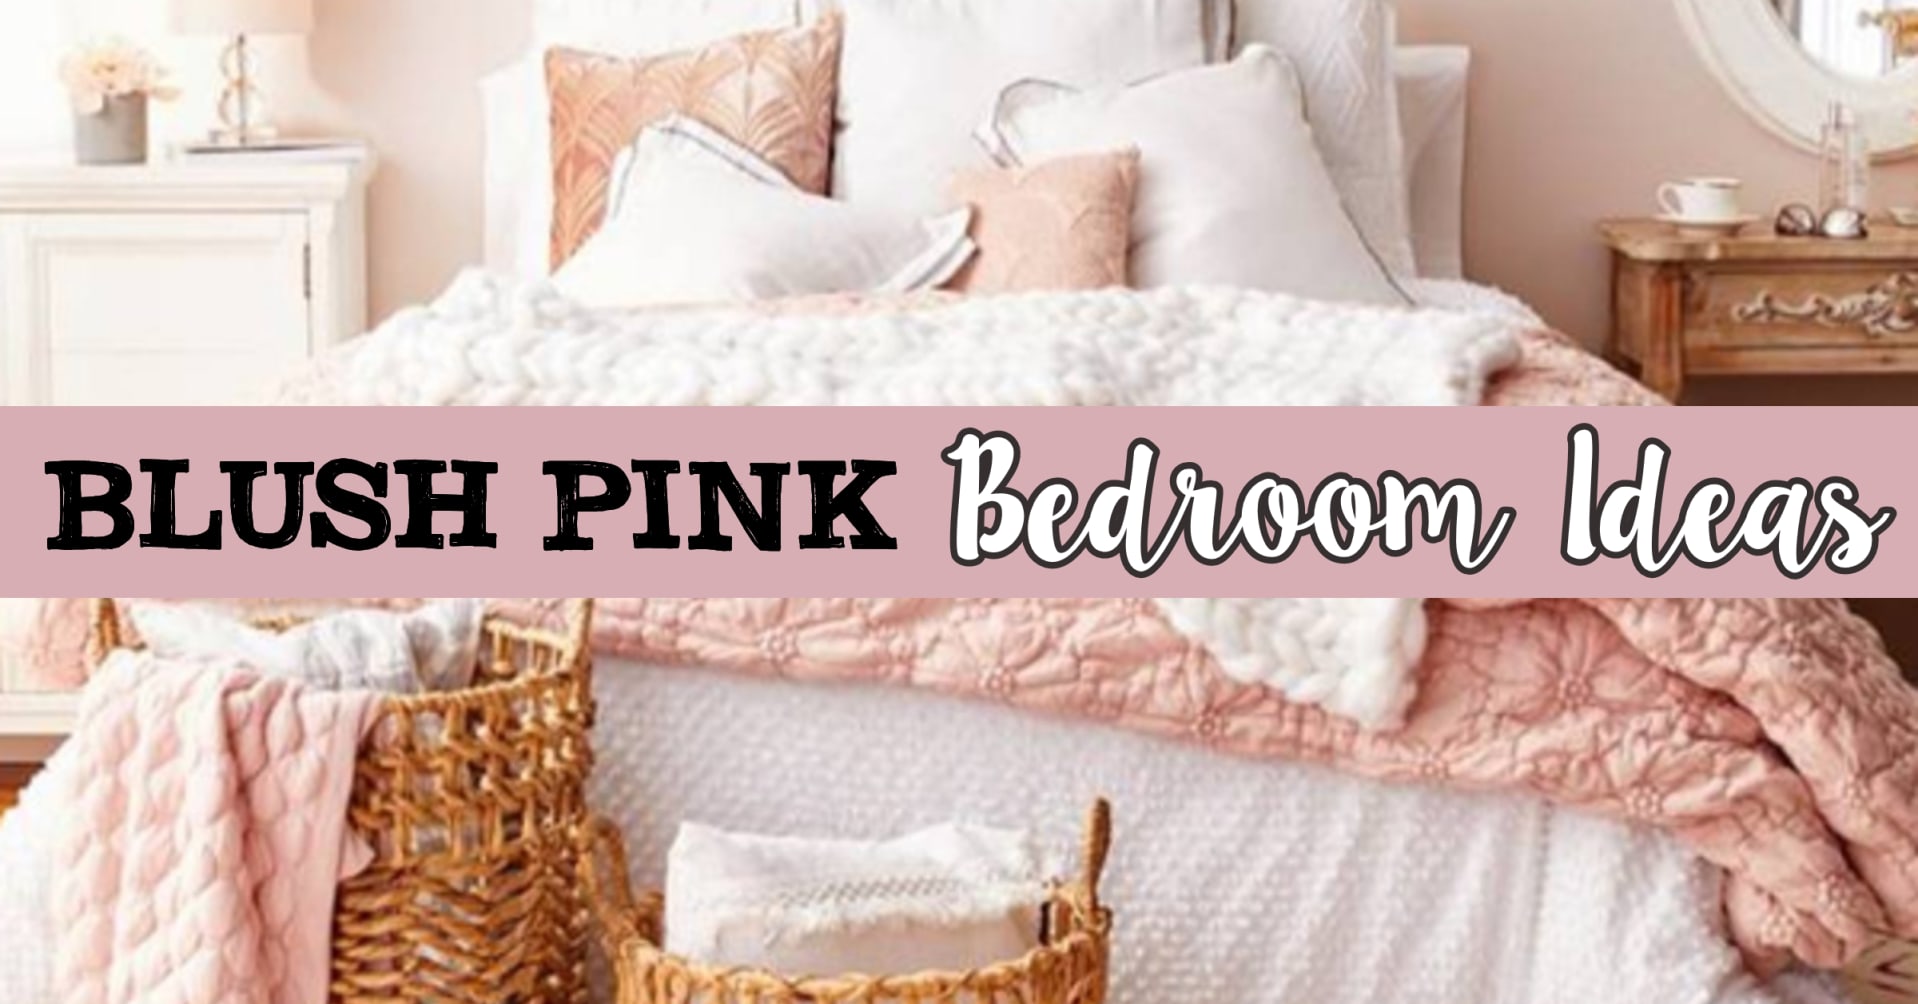 Blush Pink Bedroom Ideas Dusty Rose Bedroom Decor And Bedding I